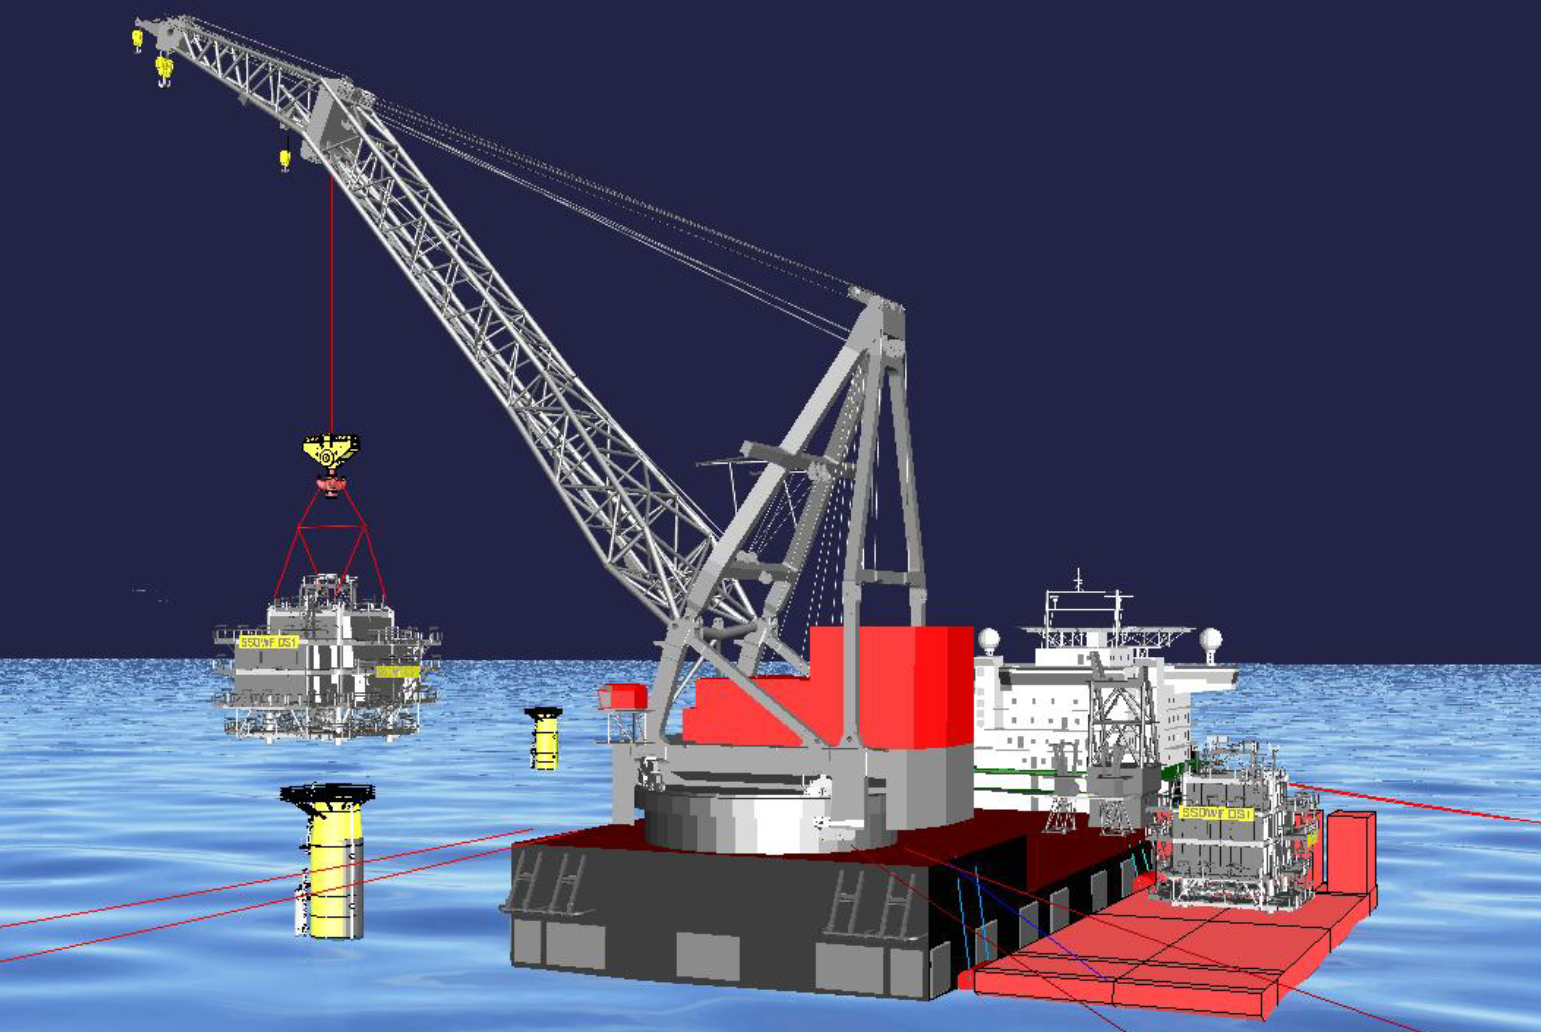 Transport & installation offshore structures - marine dynamics